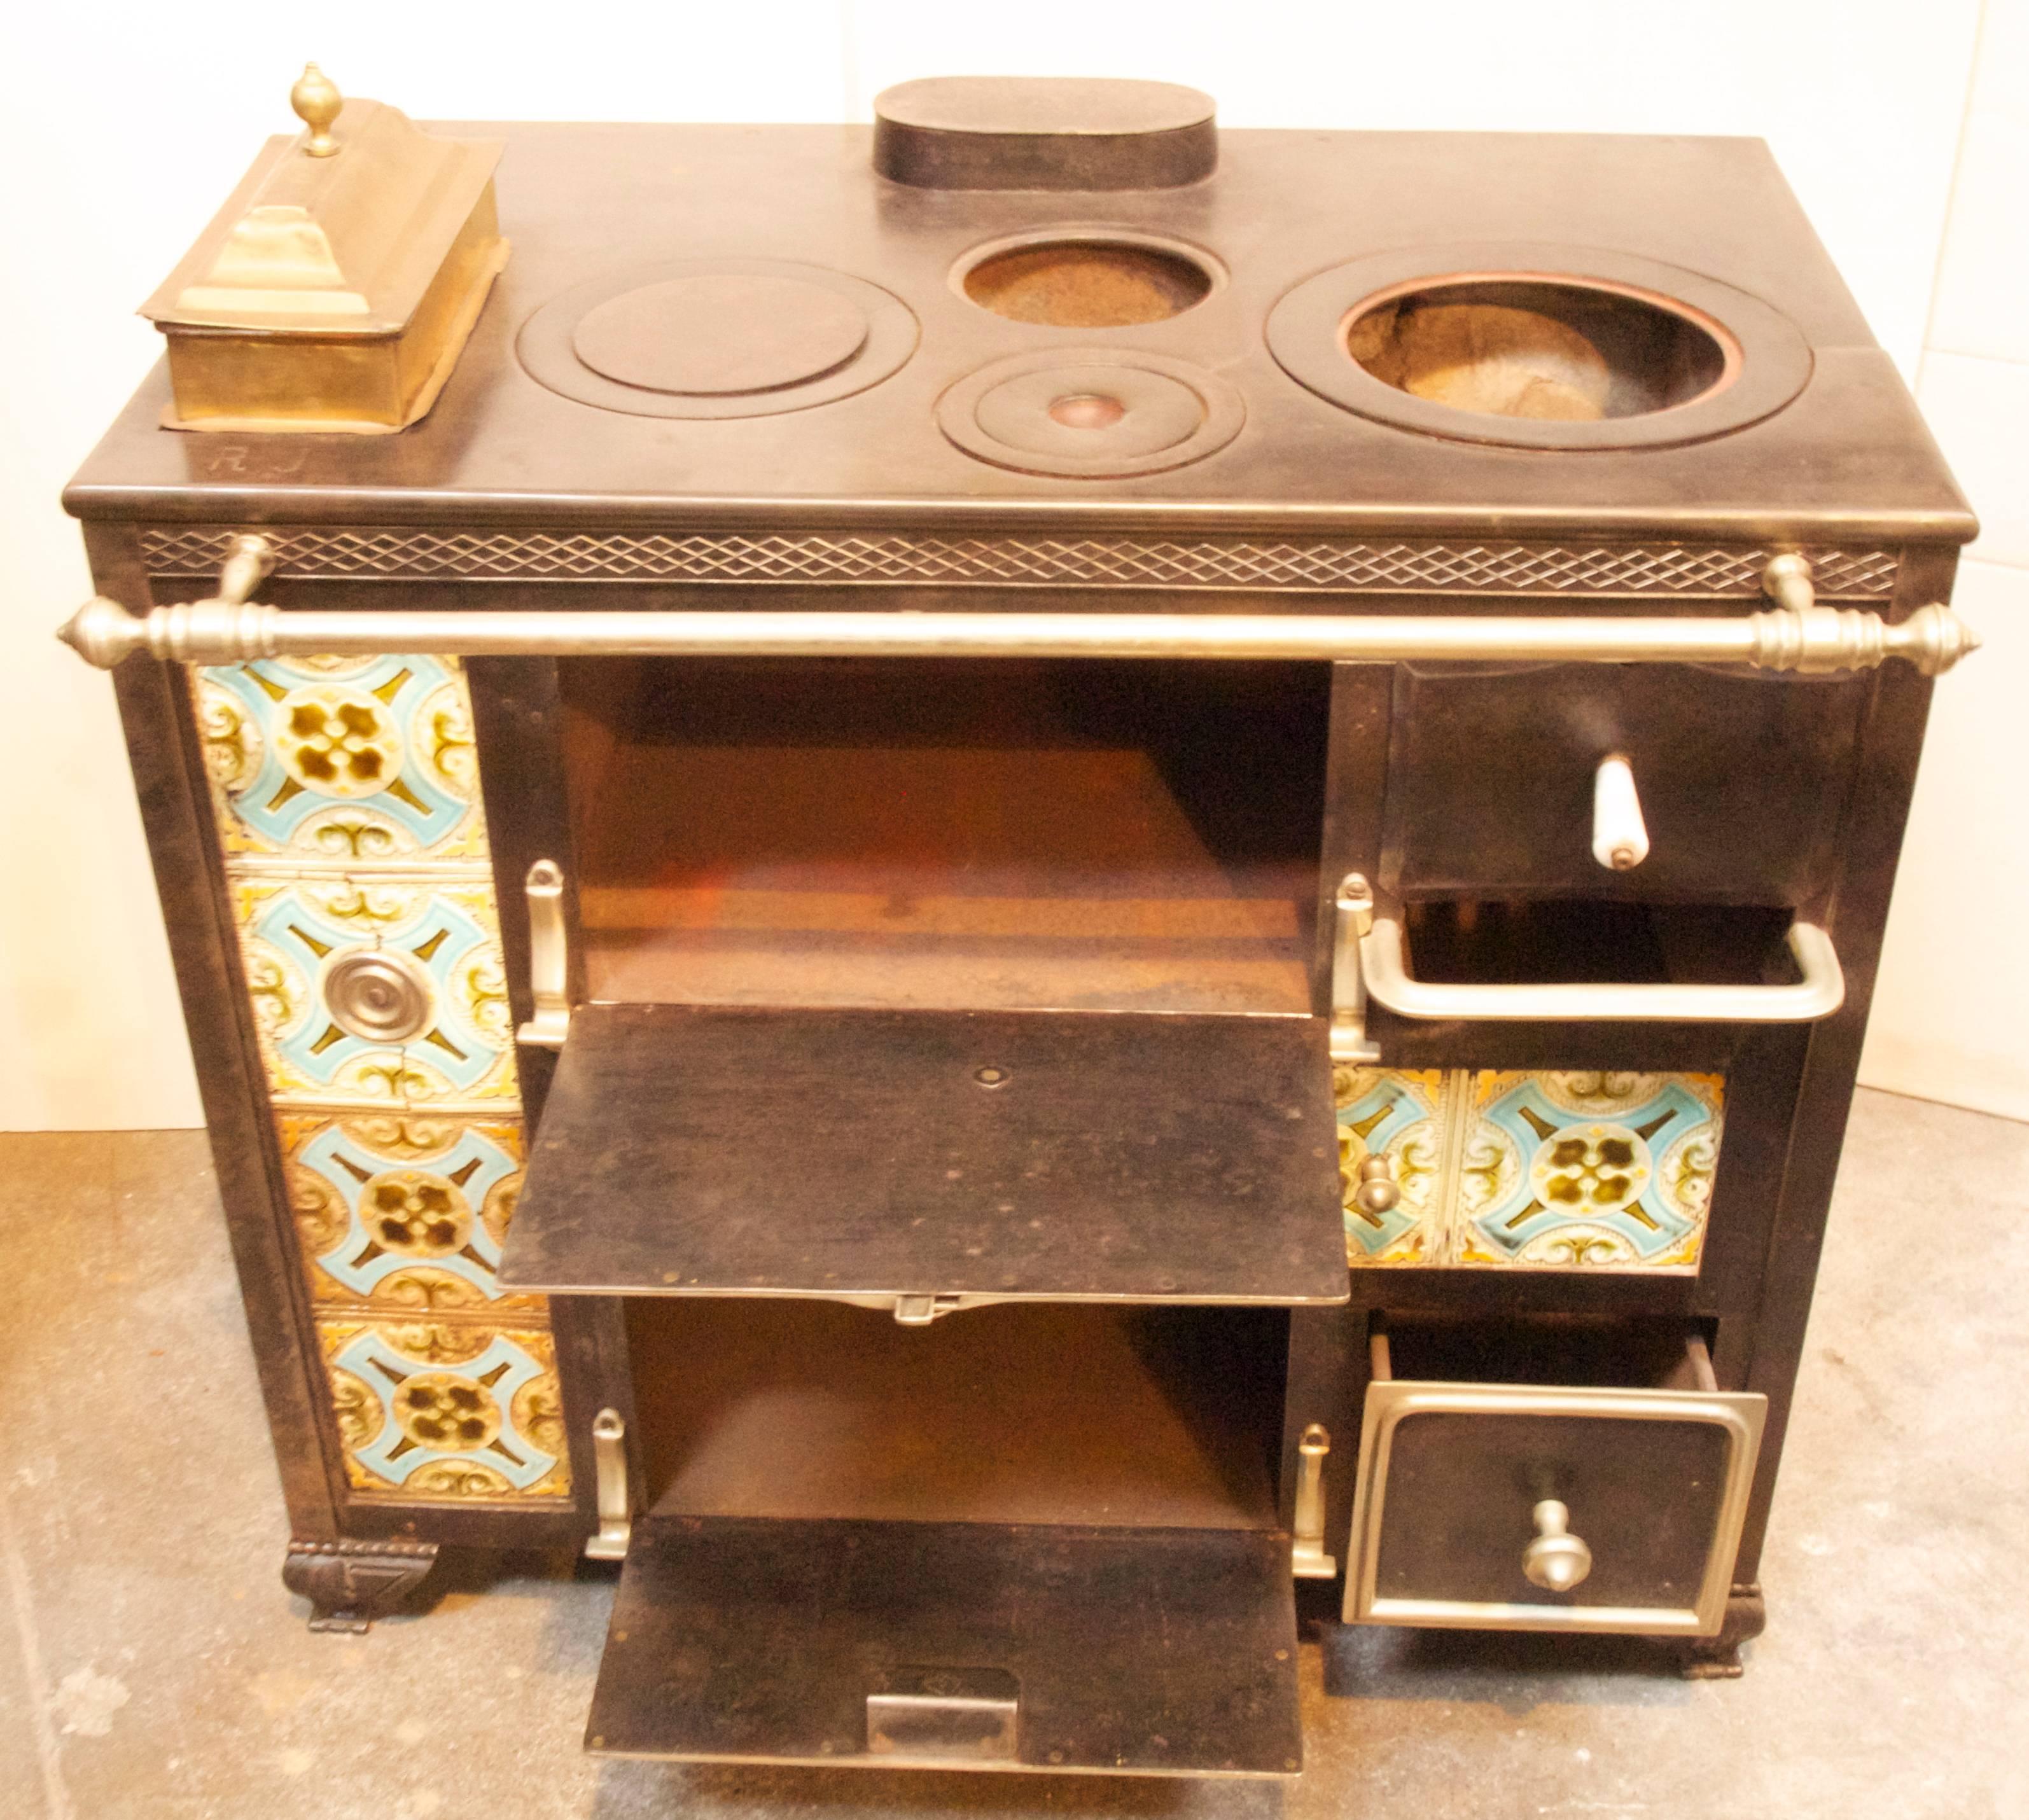 Early 19th century French coal and wood burning cast iron cooking stove with nickel plated hardware, brass and ceramic tile decoration.